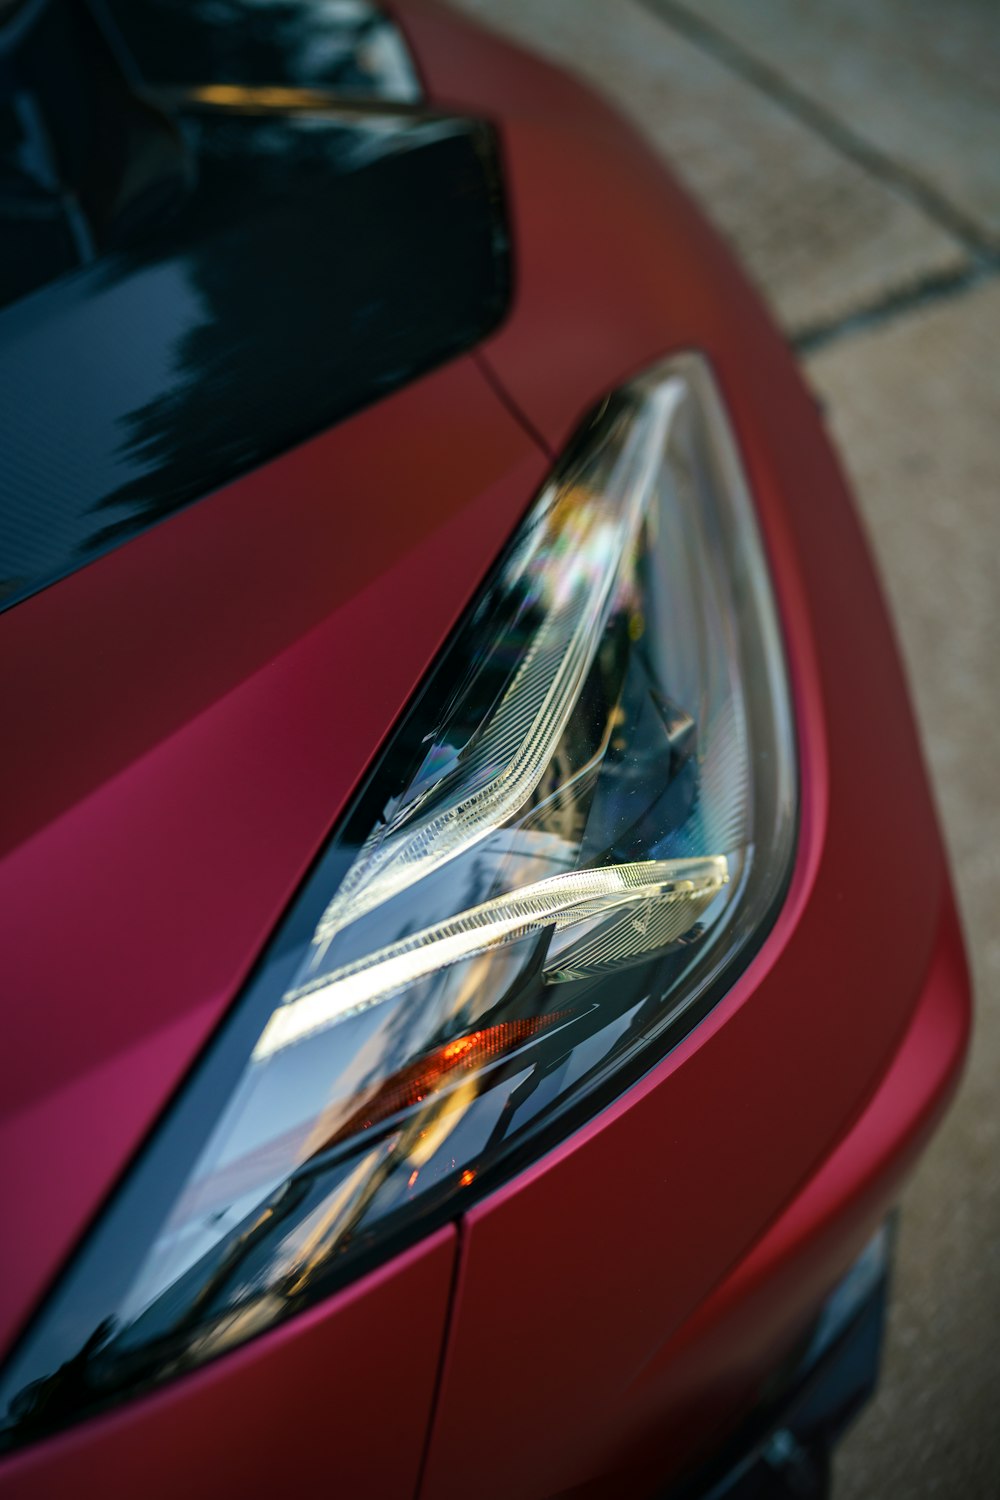 a close up of the headlight of a red car